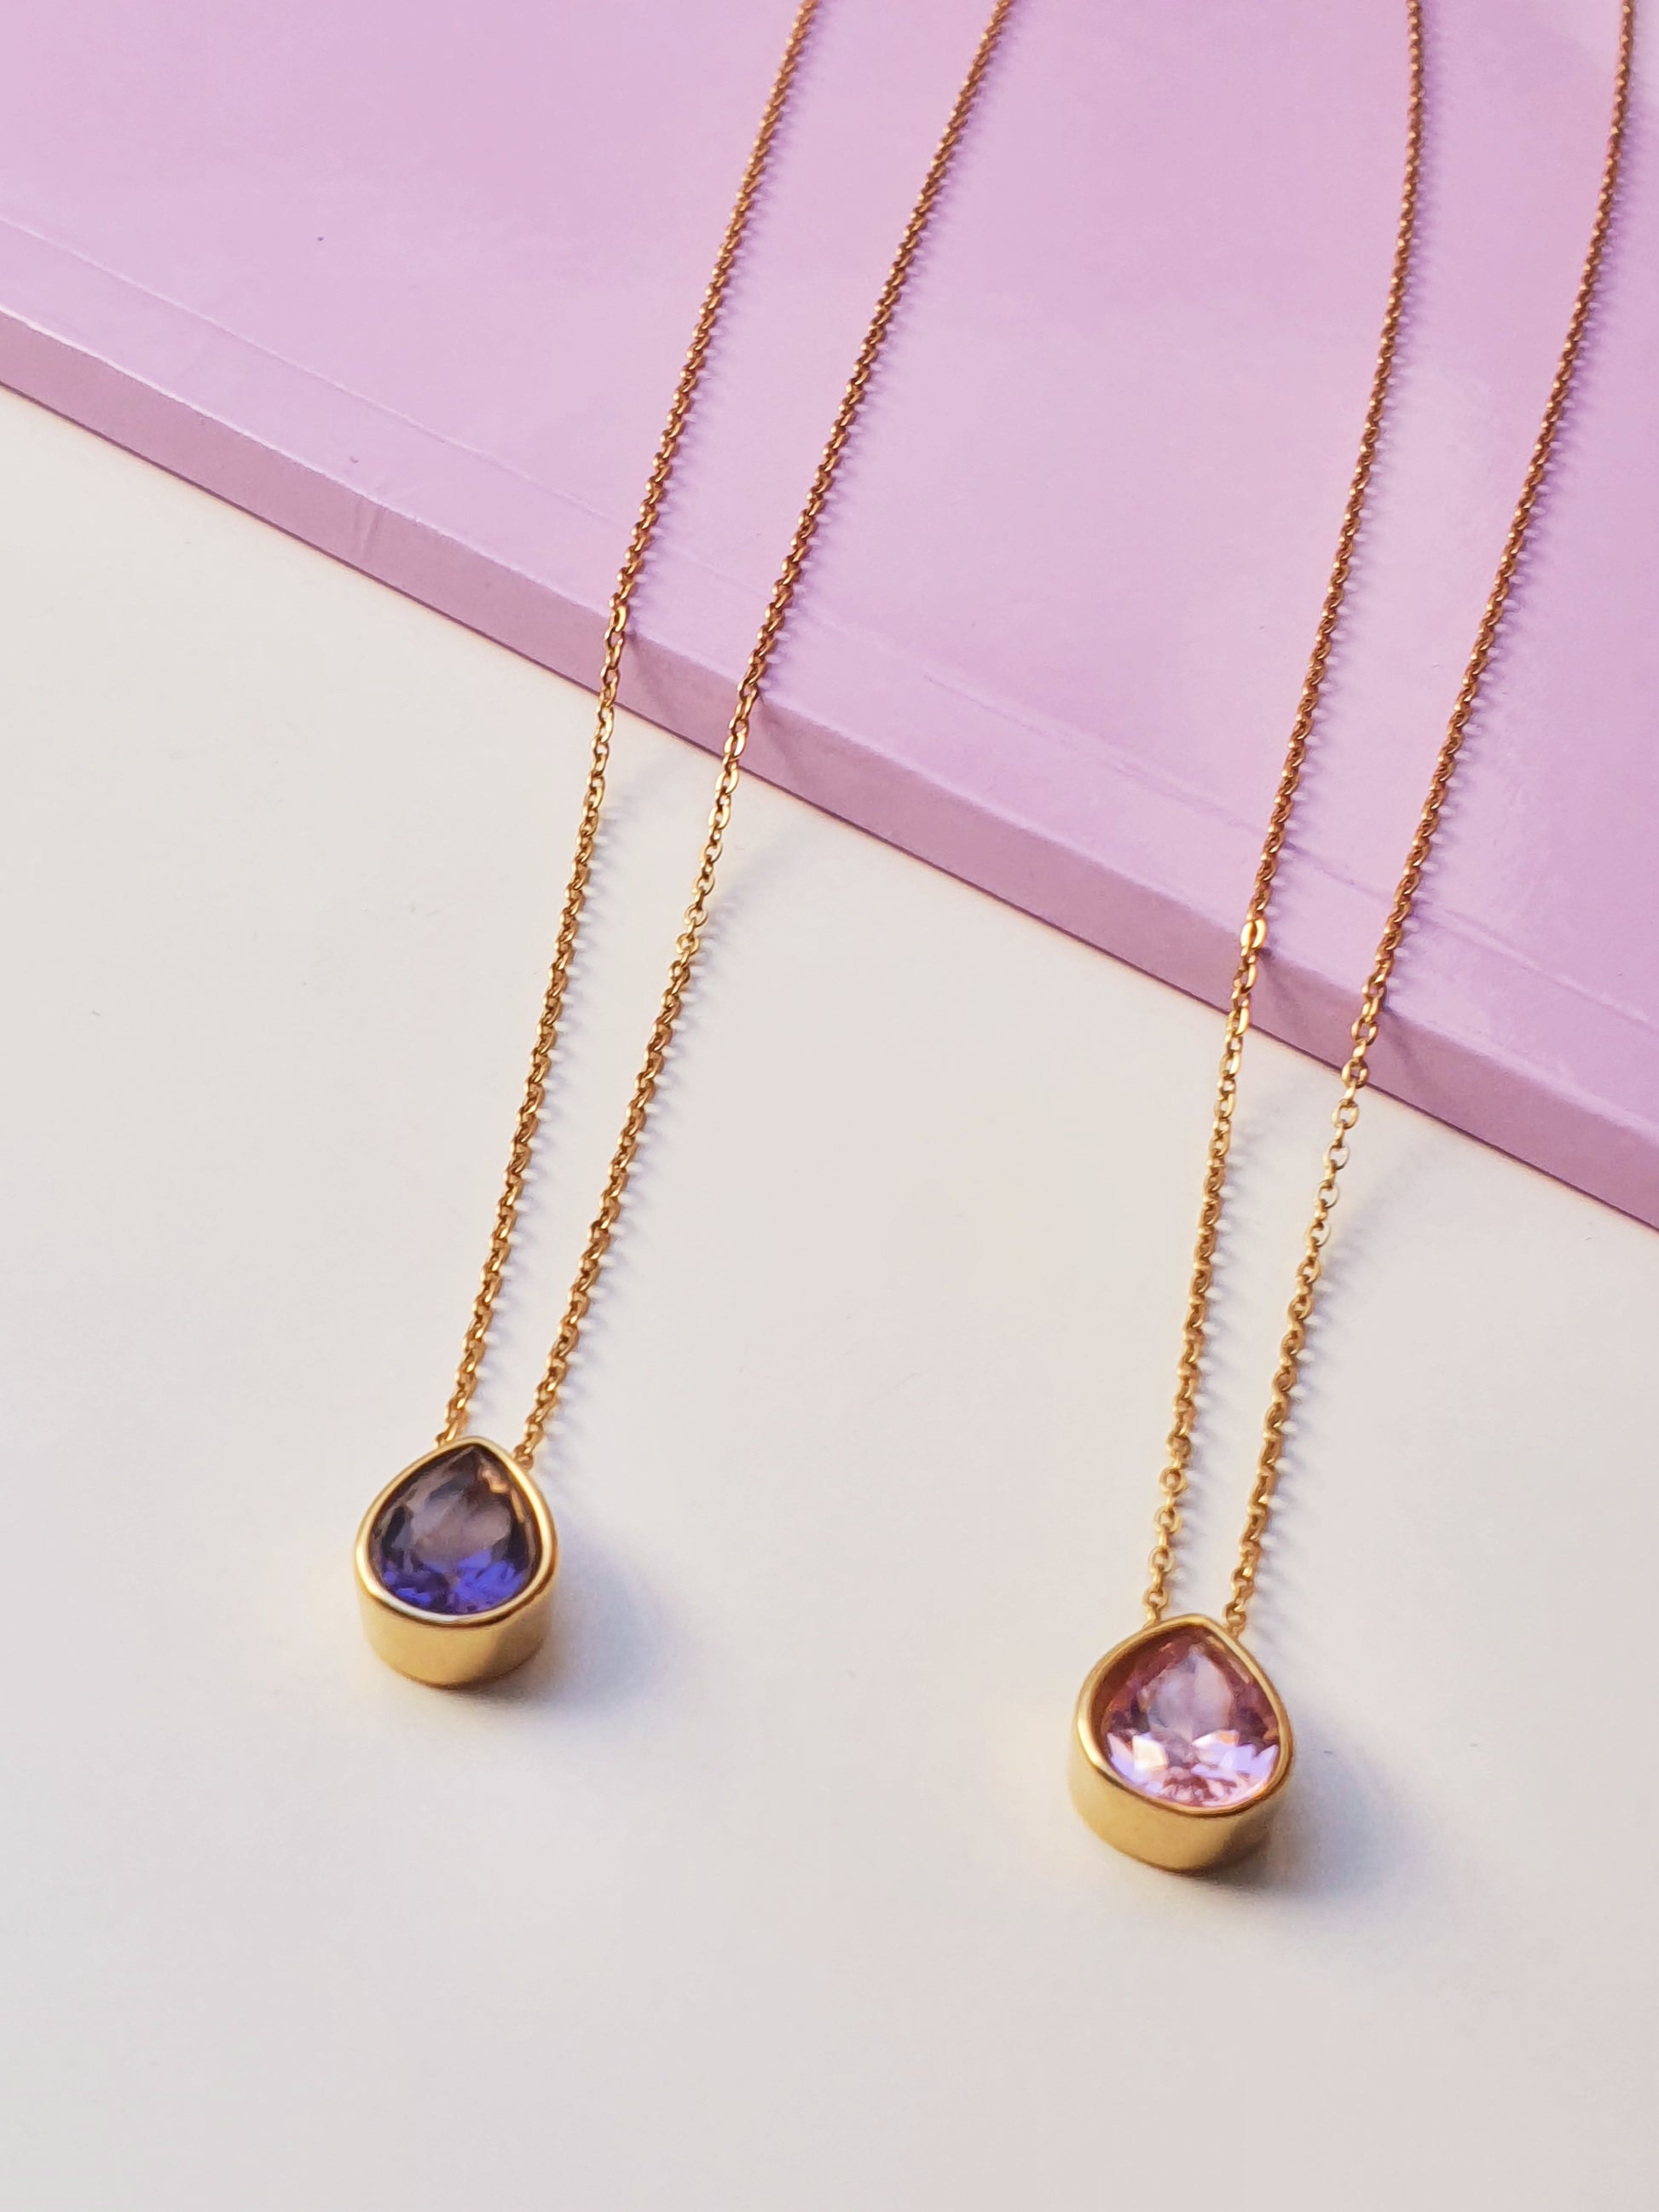 Two gold necklaces with teardrop pendants reast on a purple book and white surface. One pendant has a purple stone and the other has a pale pink stone 